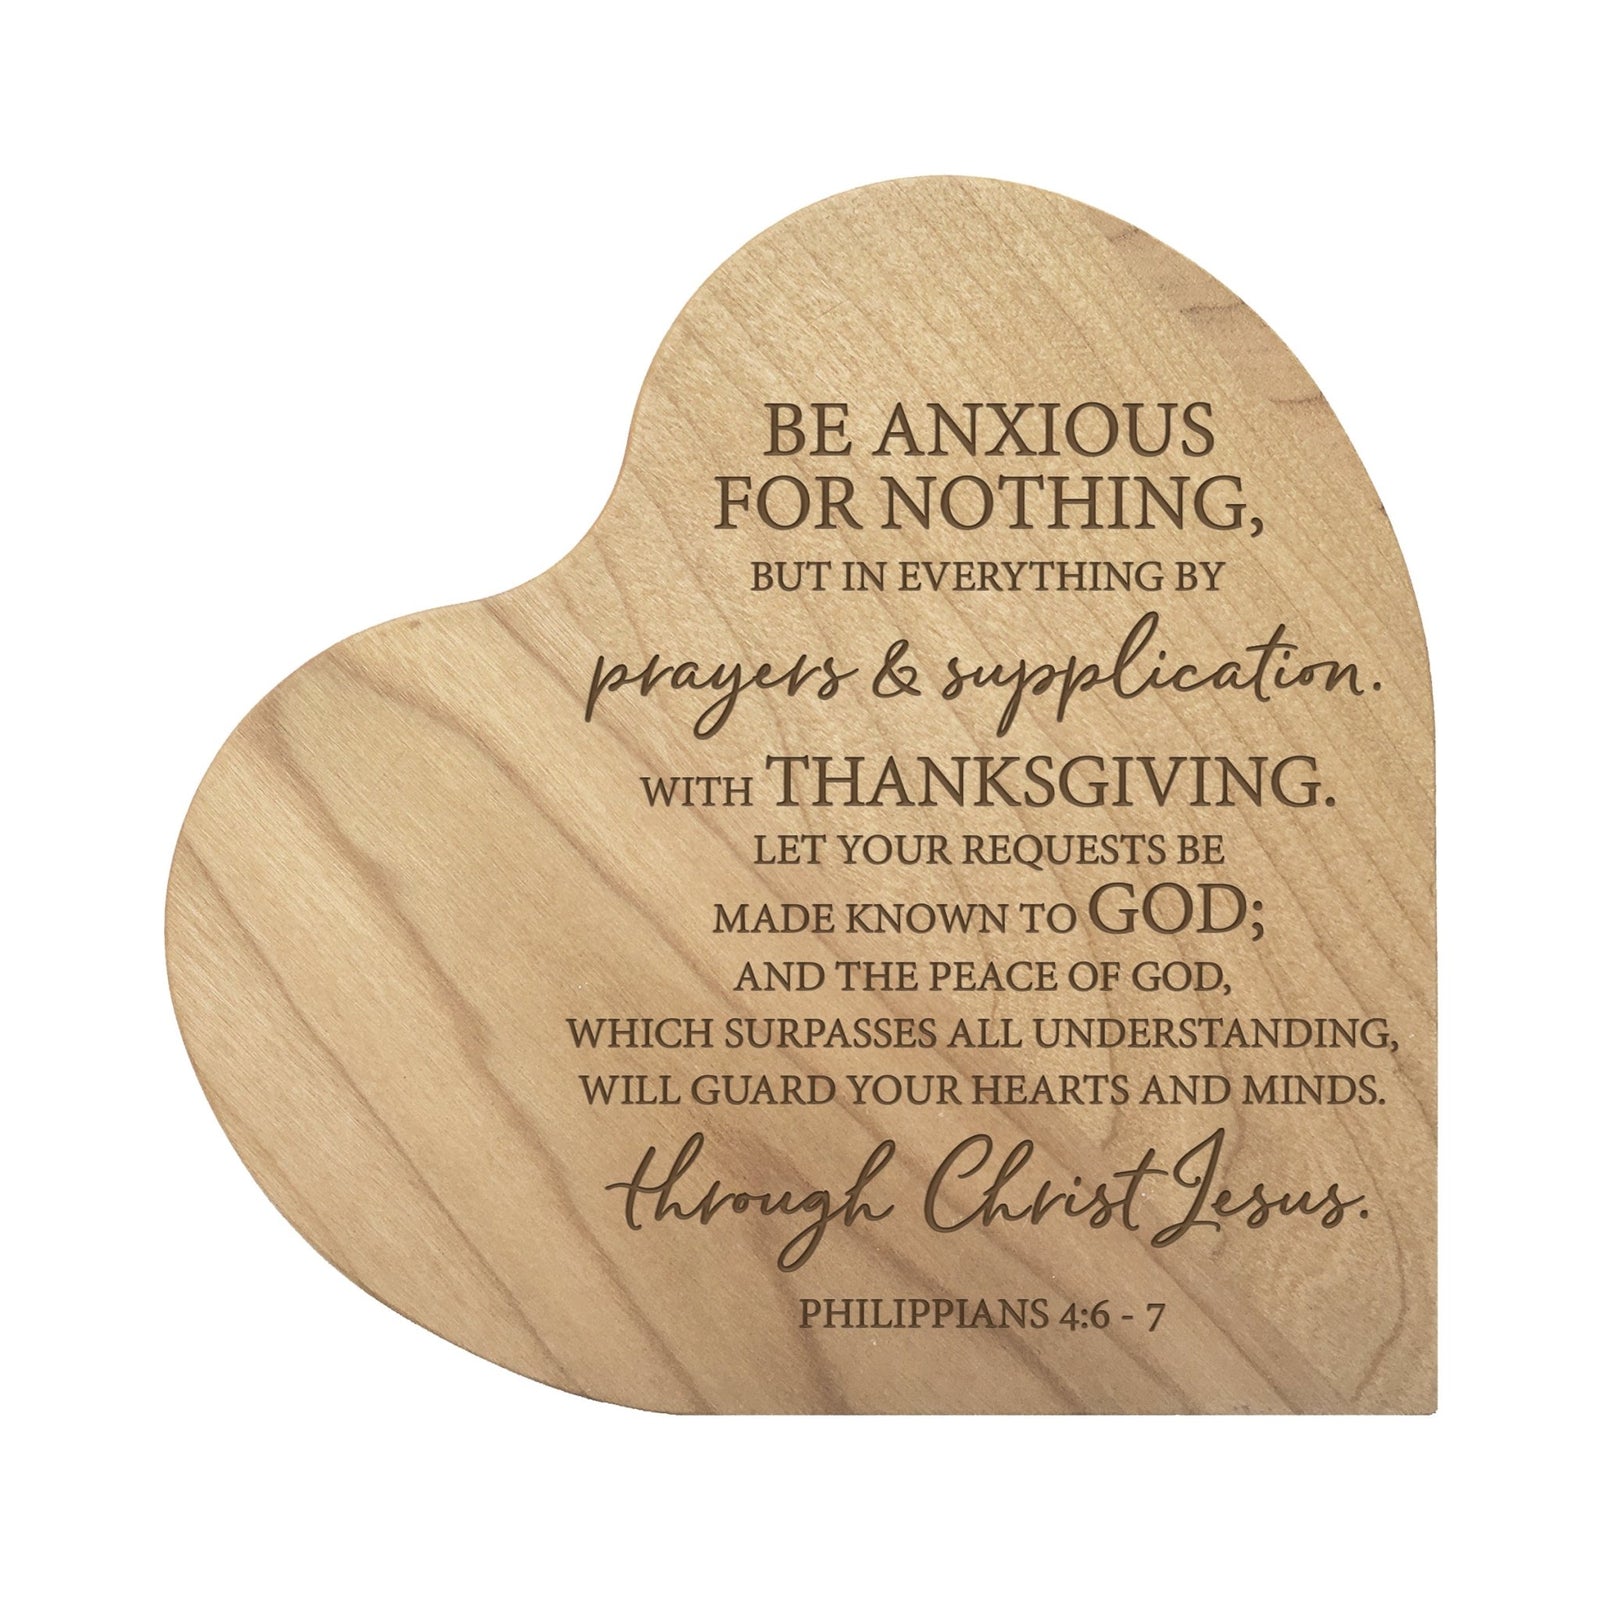 Engraved Wooden Inspirational Heart Block 5” x 5.25” x 0.75” - Be Anxious for Nothing - LifeSong Milestones